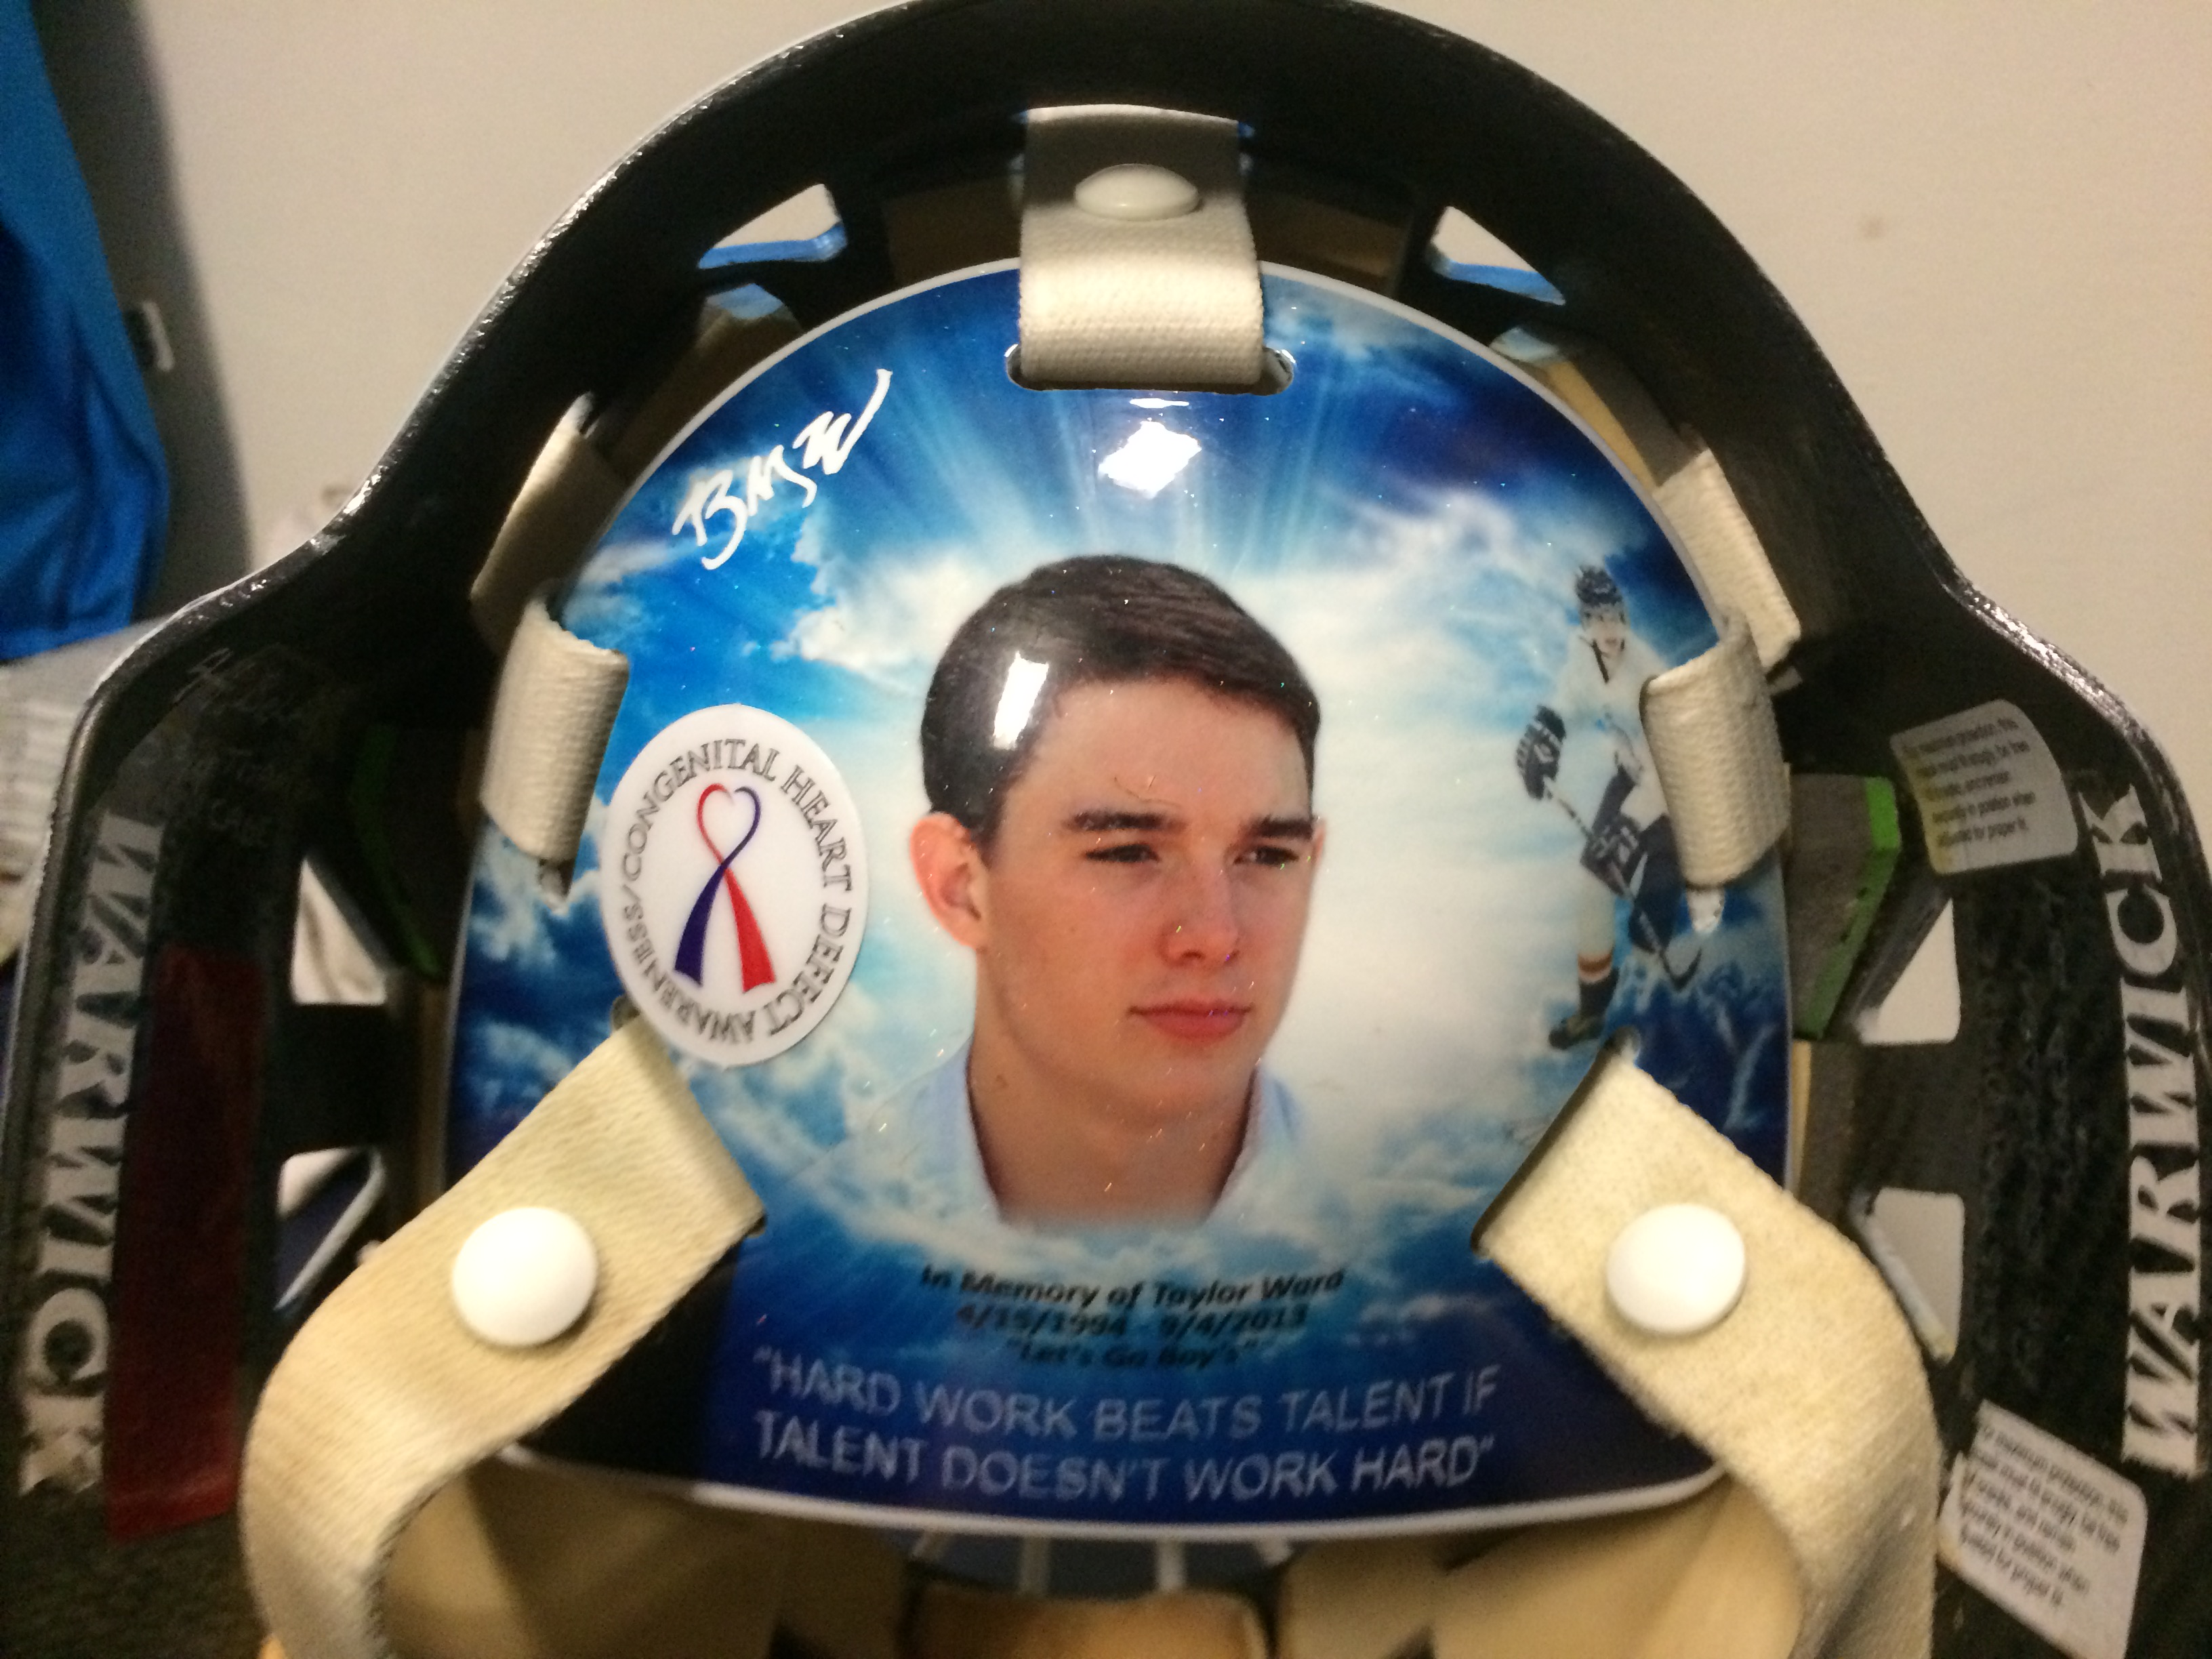 BYU goalie Brandon Ward's helmet commemorates his late brother, Taylor, who was killed in a car accident. (Brandon Ward)